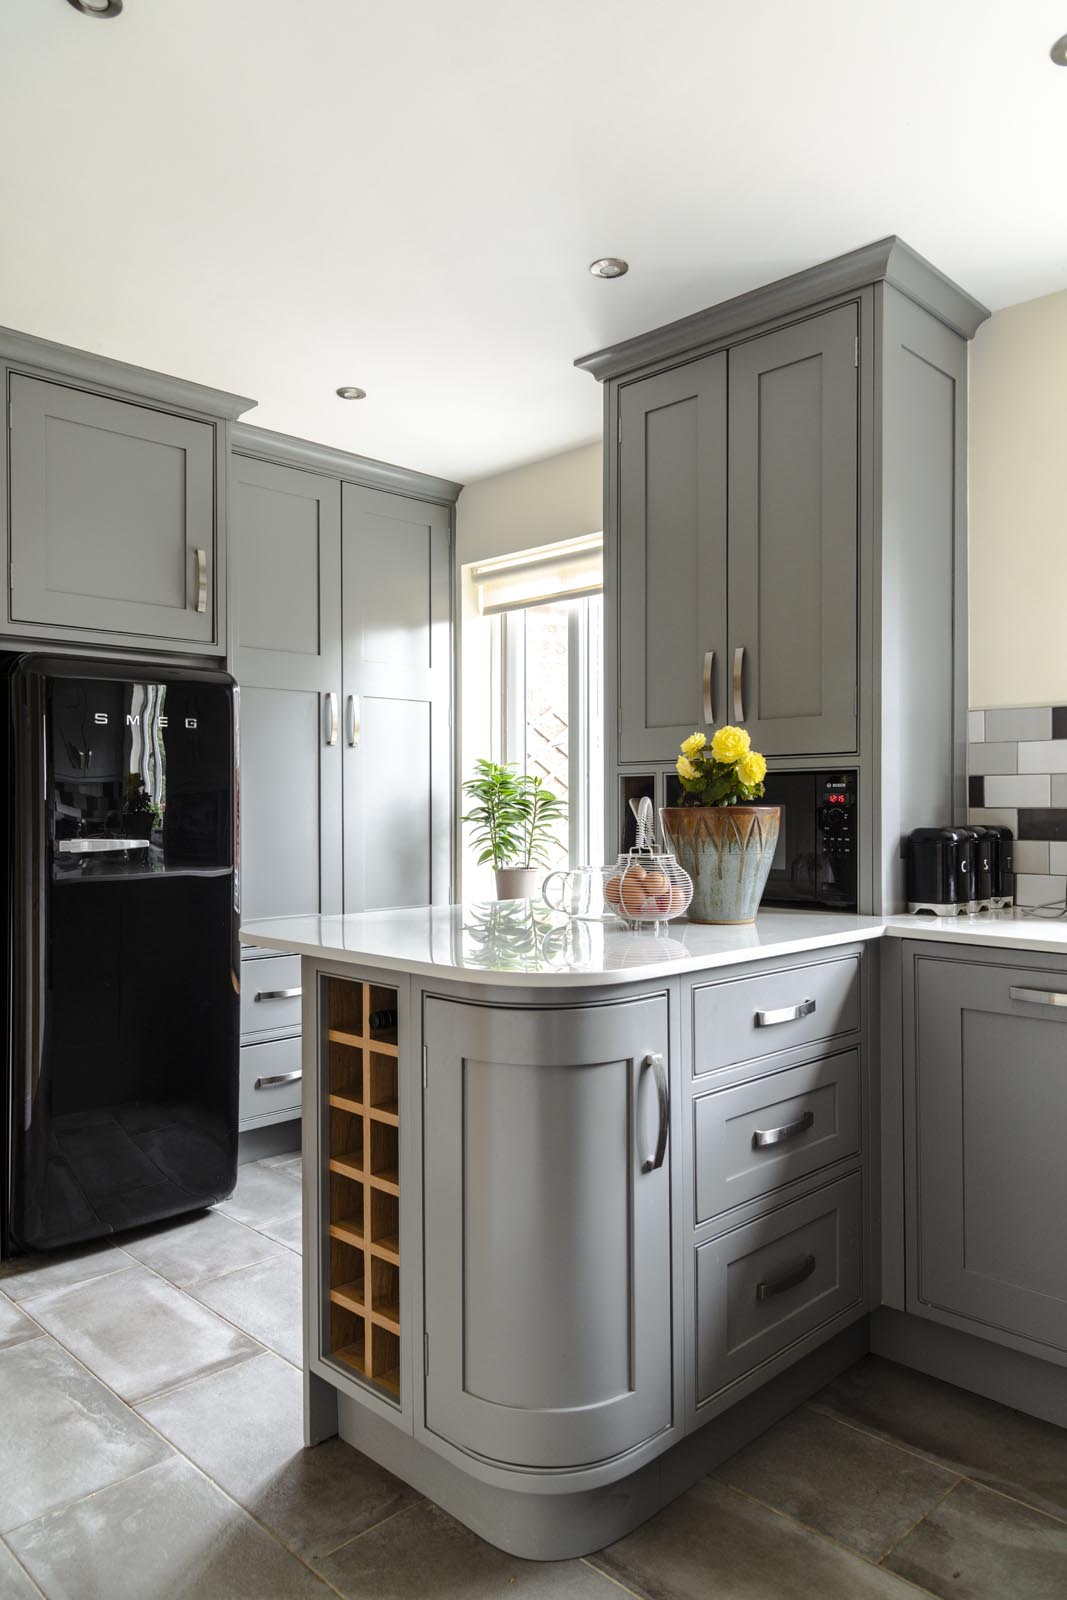 Custom made kitchen. A section of the kitchen shows a unit with corner cupboard and wine rack